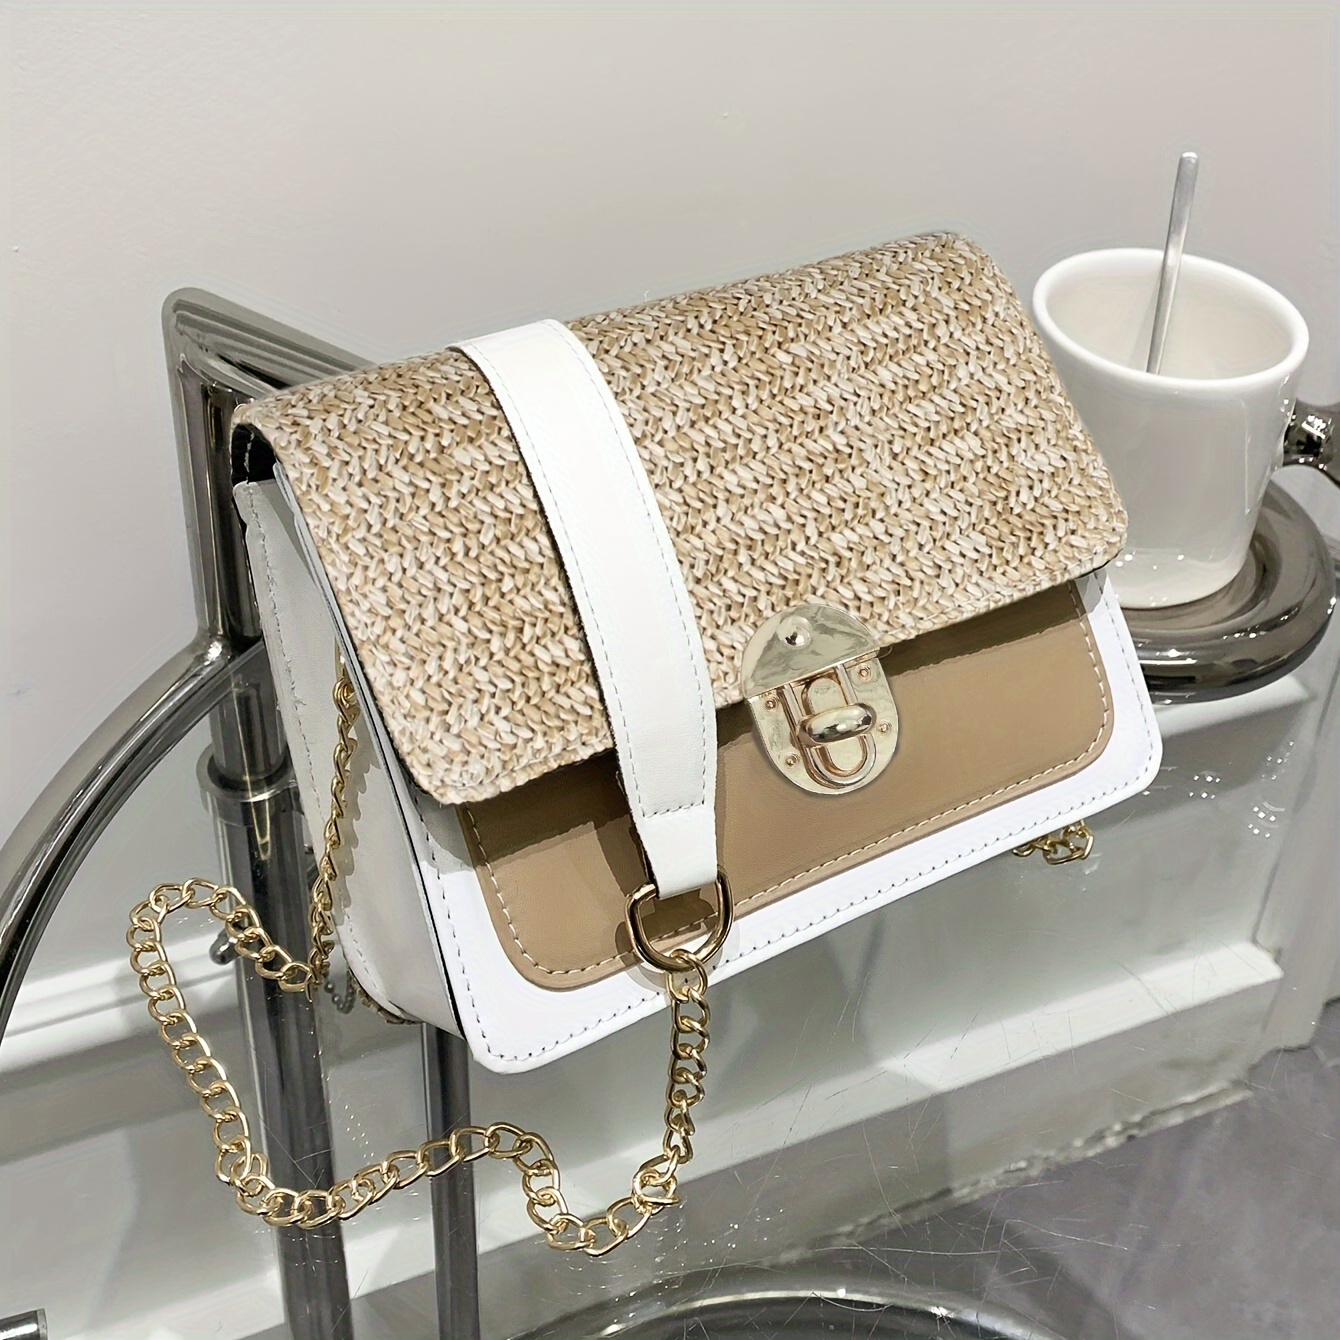 

Women's Straw & Pu Leather Crossbody Bag | Stylish Small Square Purse With Chain Strap | Trendy Lock Closure Shoulder Bag